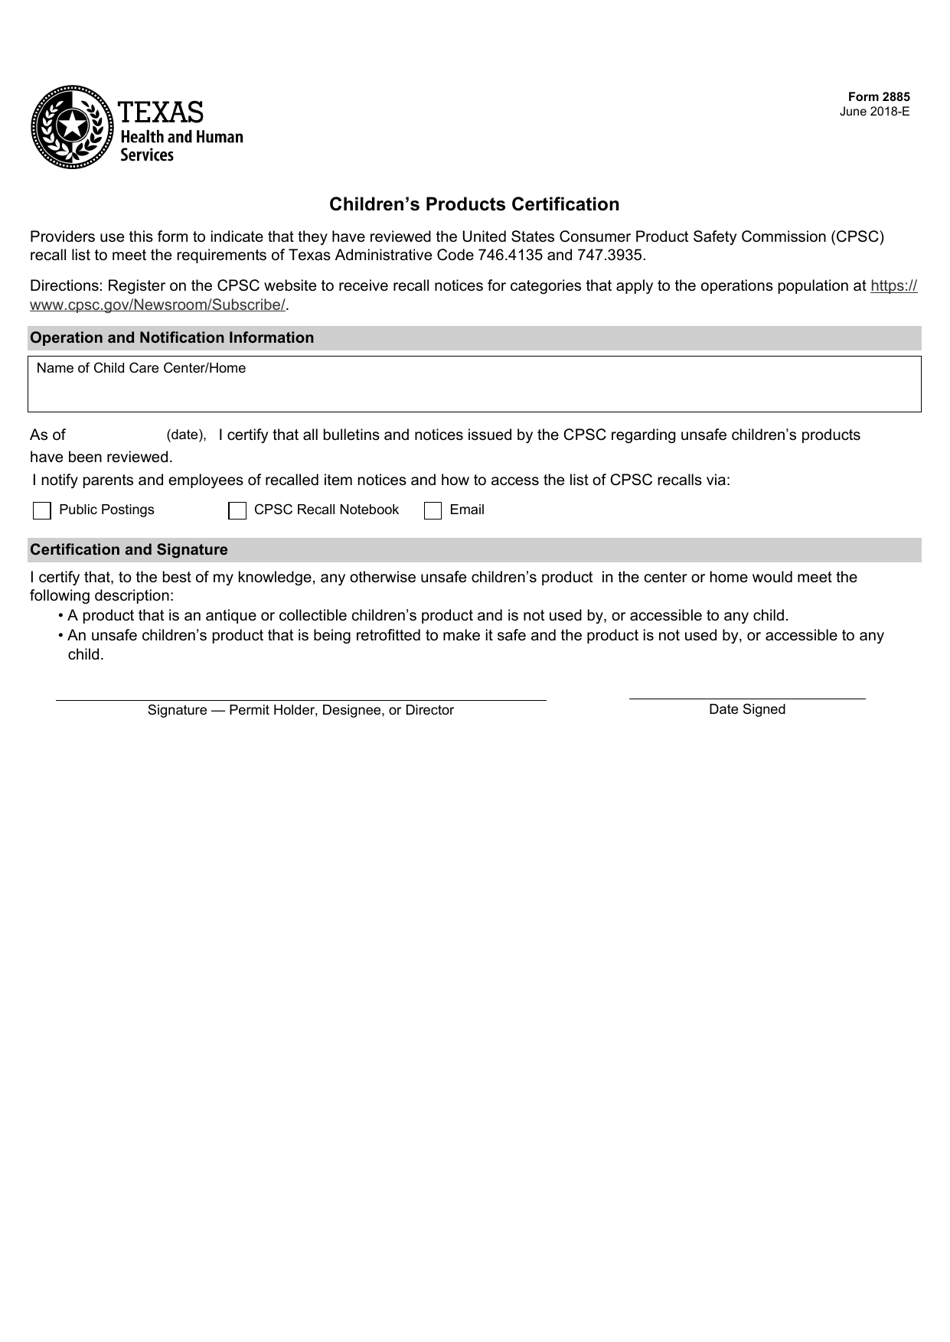 Form 2885 Childrens Products Certification - Texas, Page 1